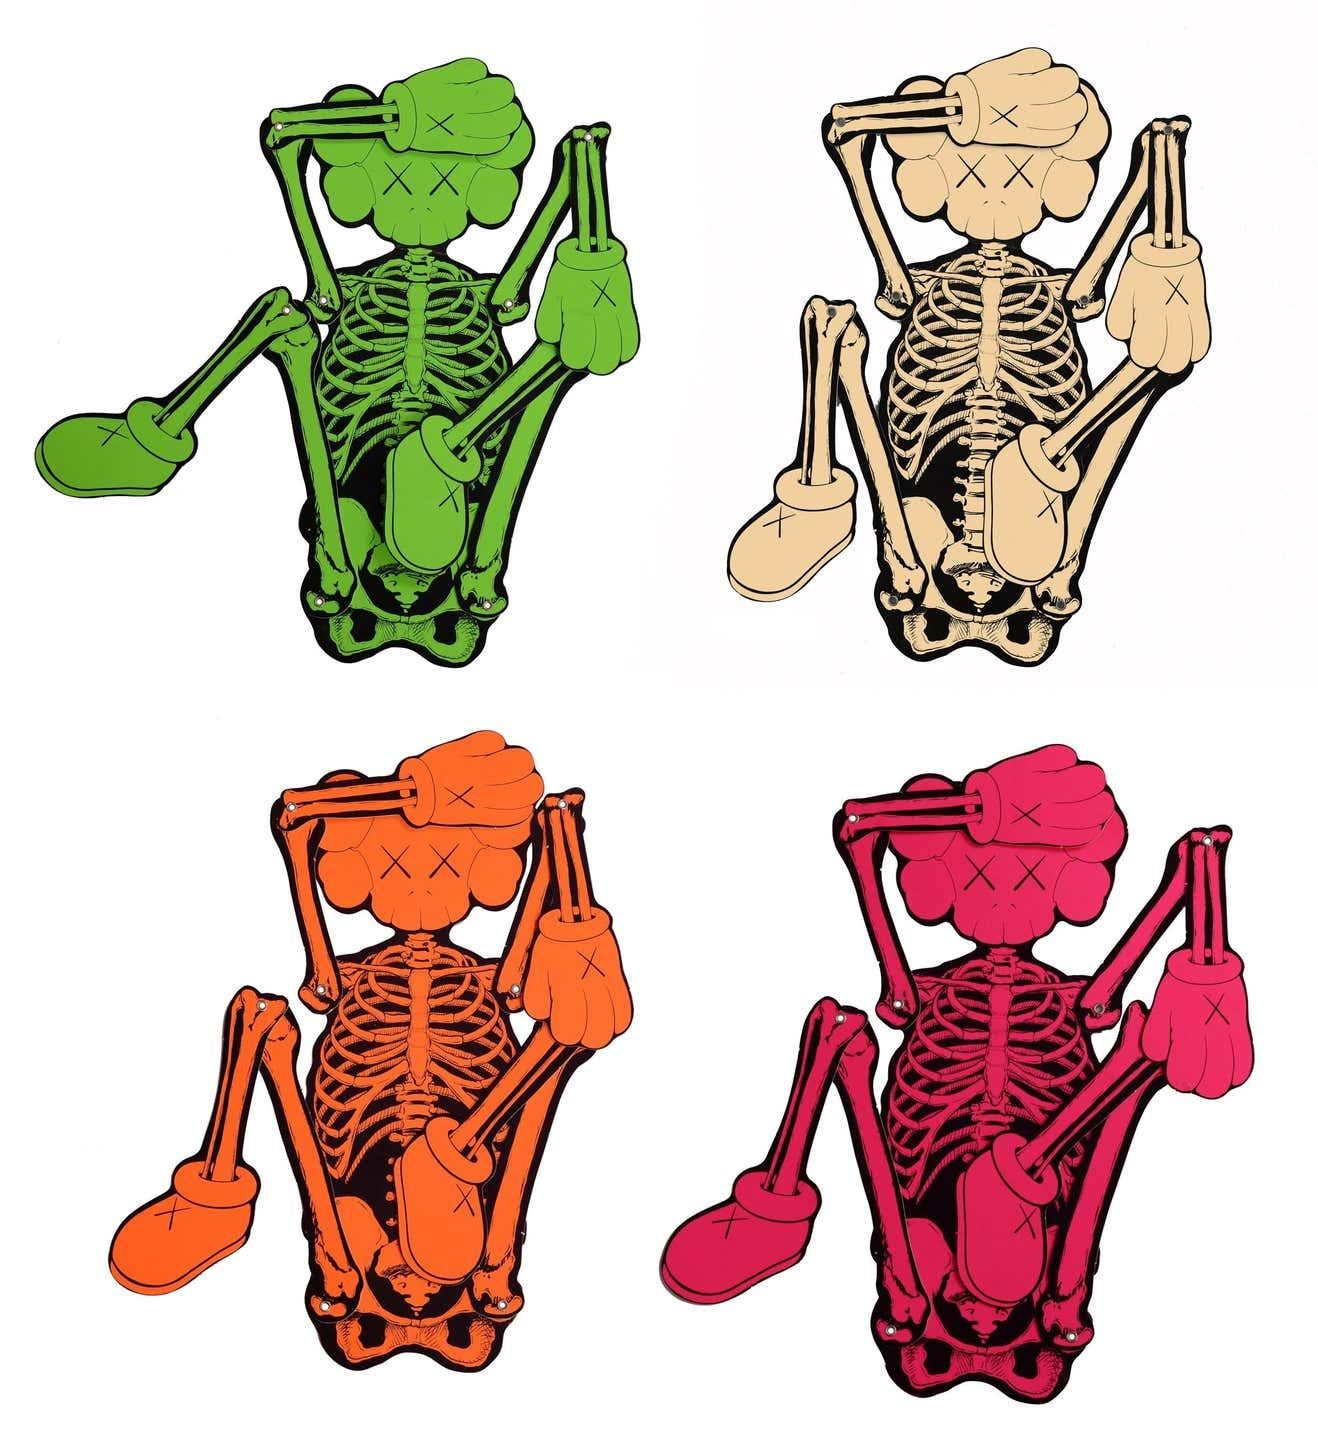 KAWS SKELETON 2021: complete set of 4 works:
A set of 4 neon printed KAWS designed skeletons published in 2021 to commemorate Halloween. Each accompanied by its KAWS illustrated collectors envelope (see image 3 of listing). A fantastic KAWS